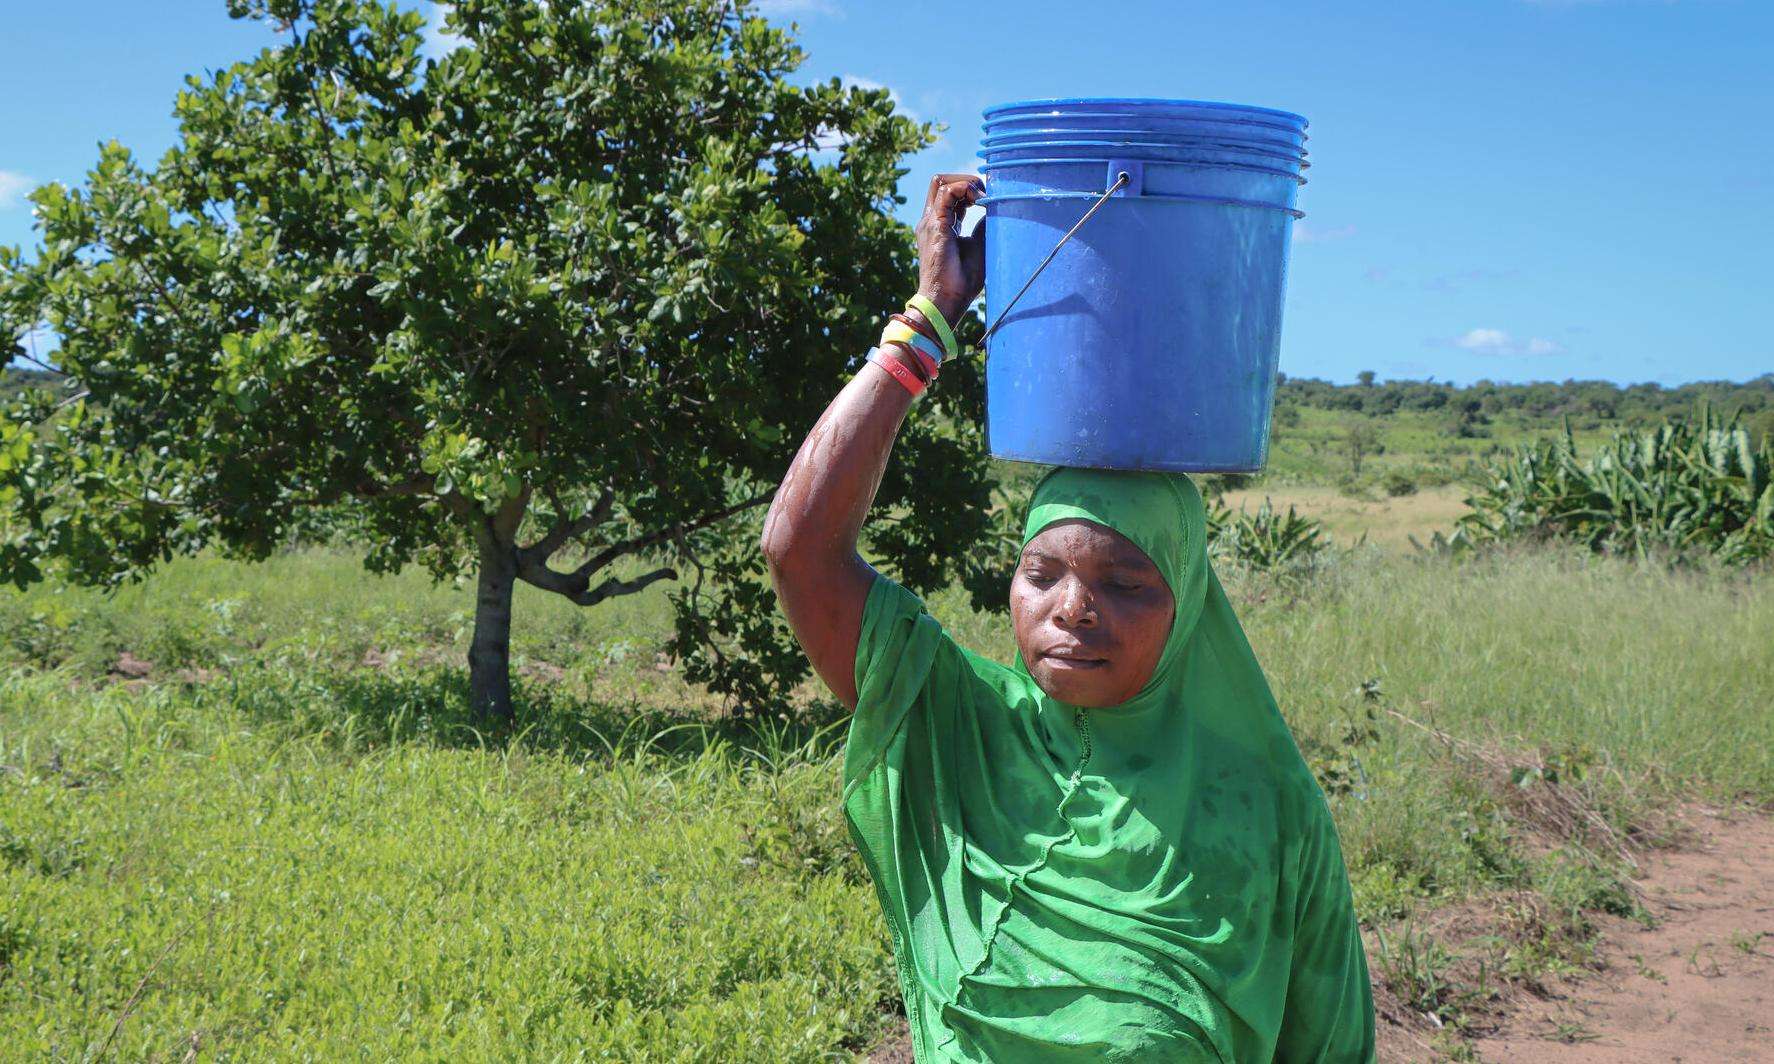 A woman carrying a bucket of water on her head in Mozambique